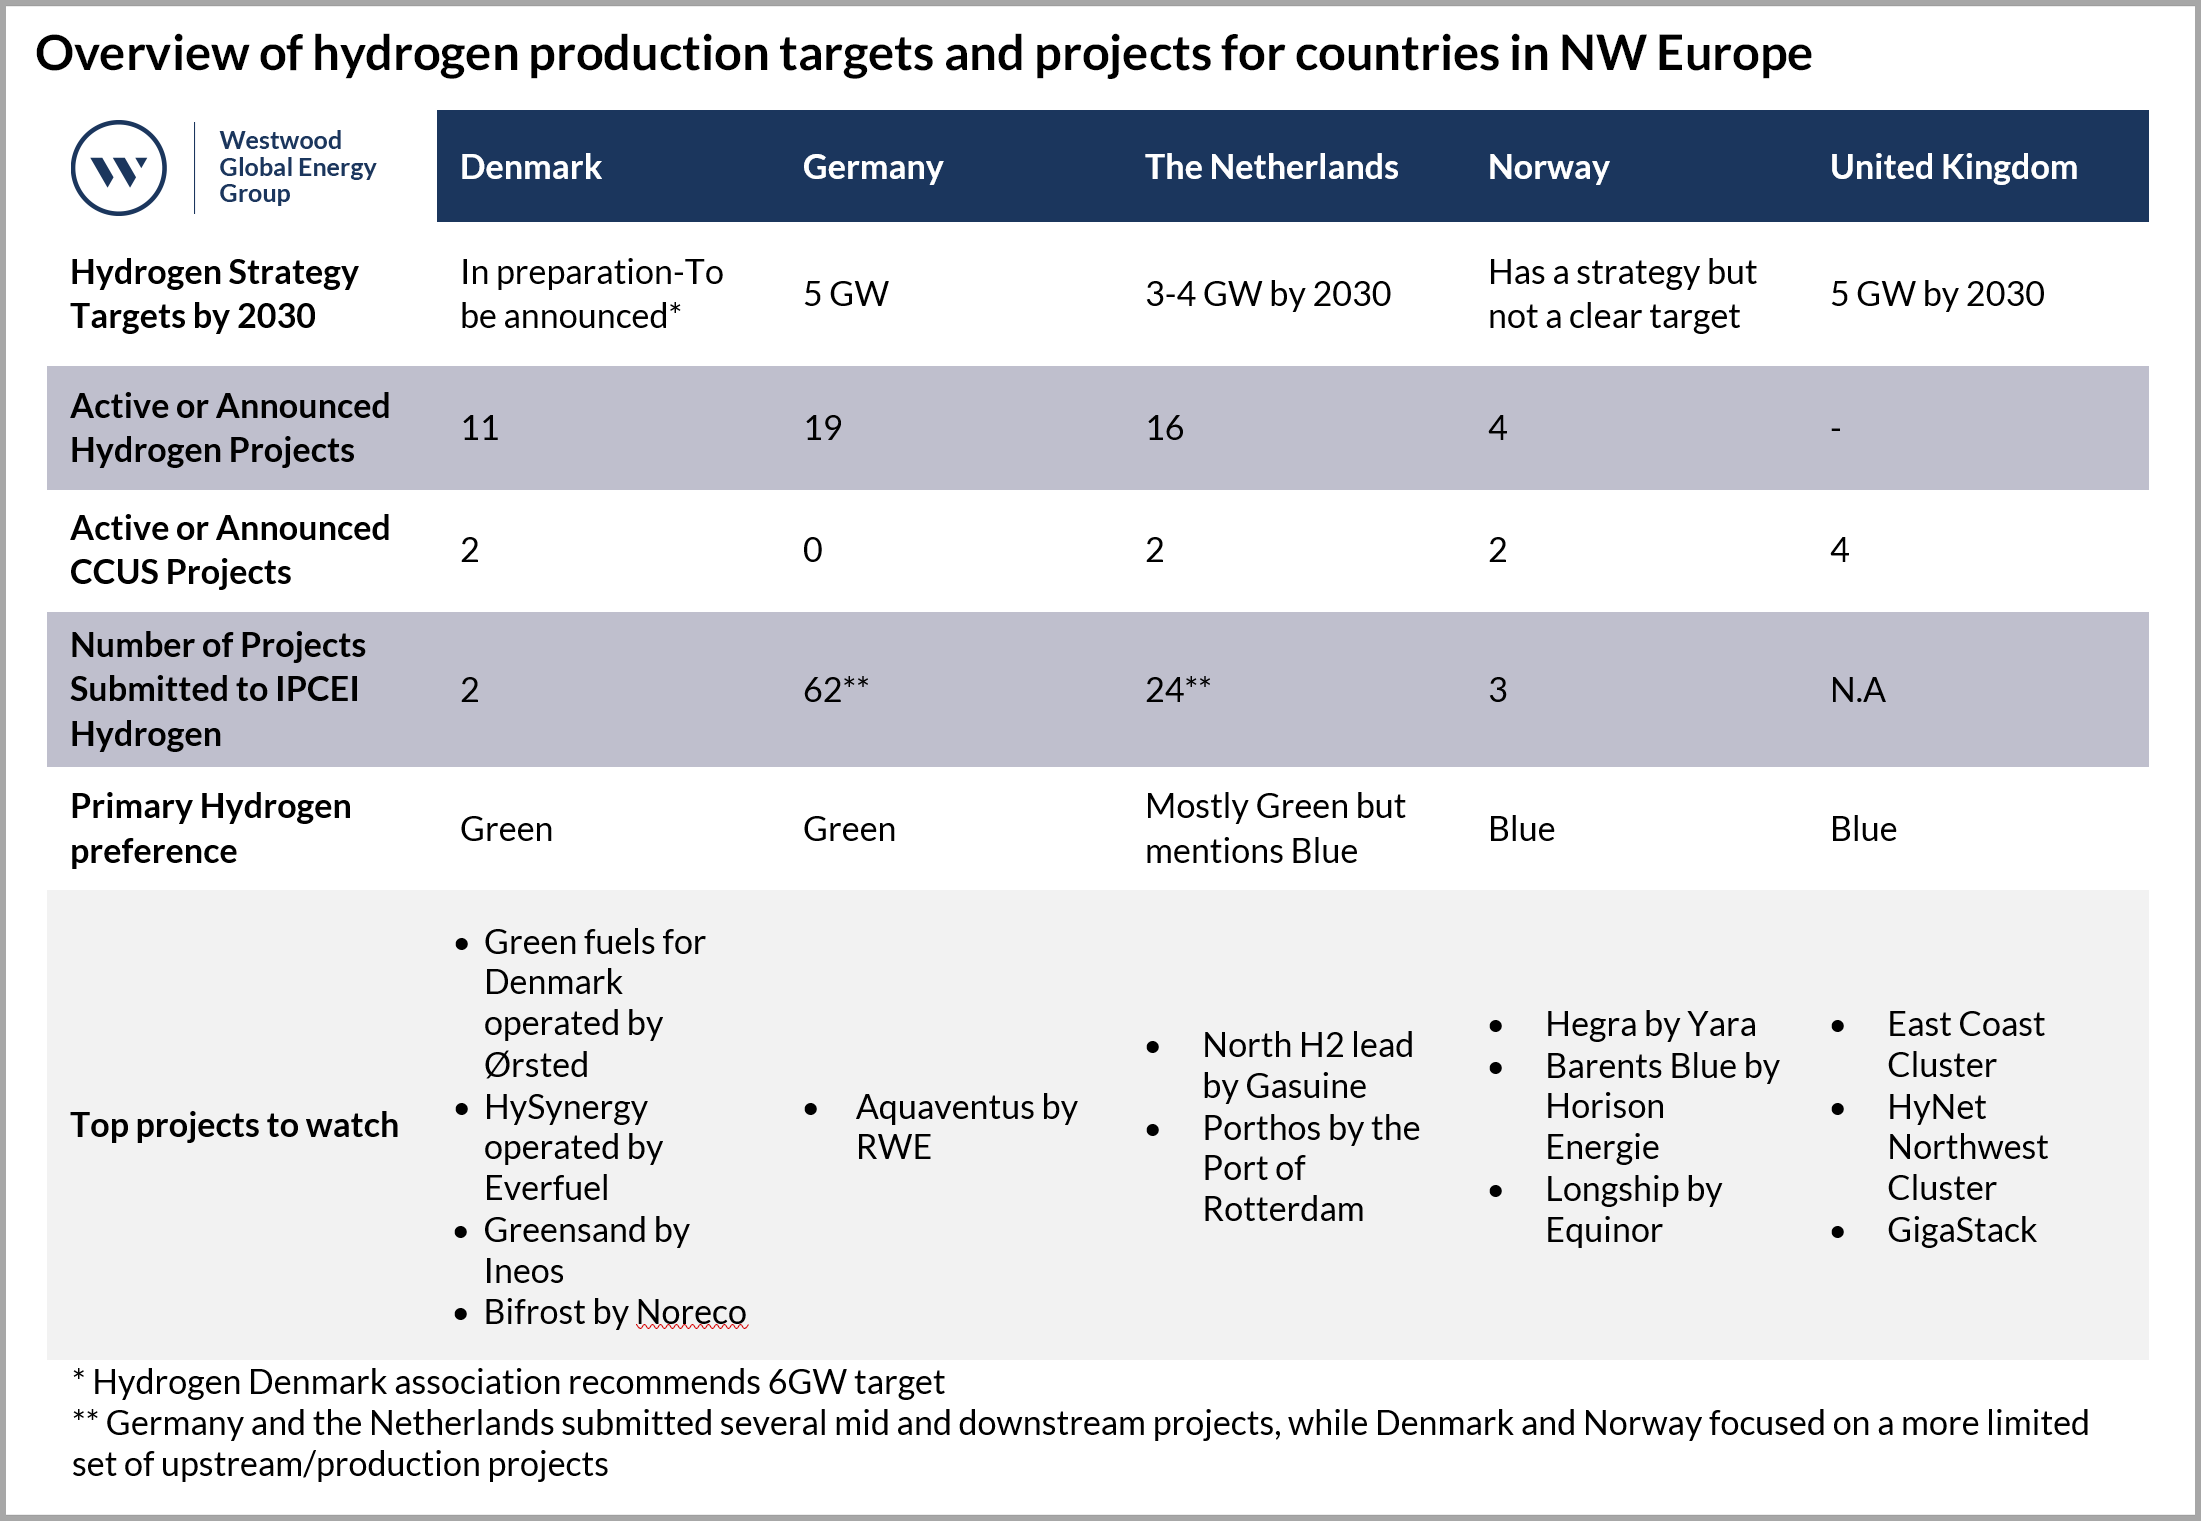 Westwood Overview of hydrogen production targets and projects for countries in NW Europe